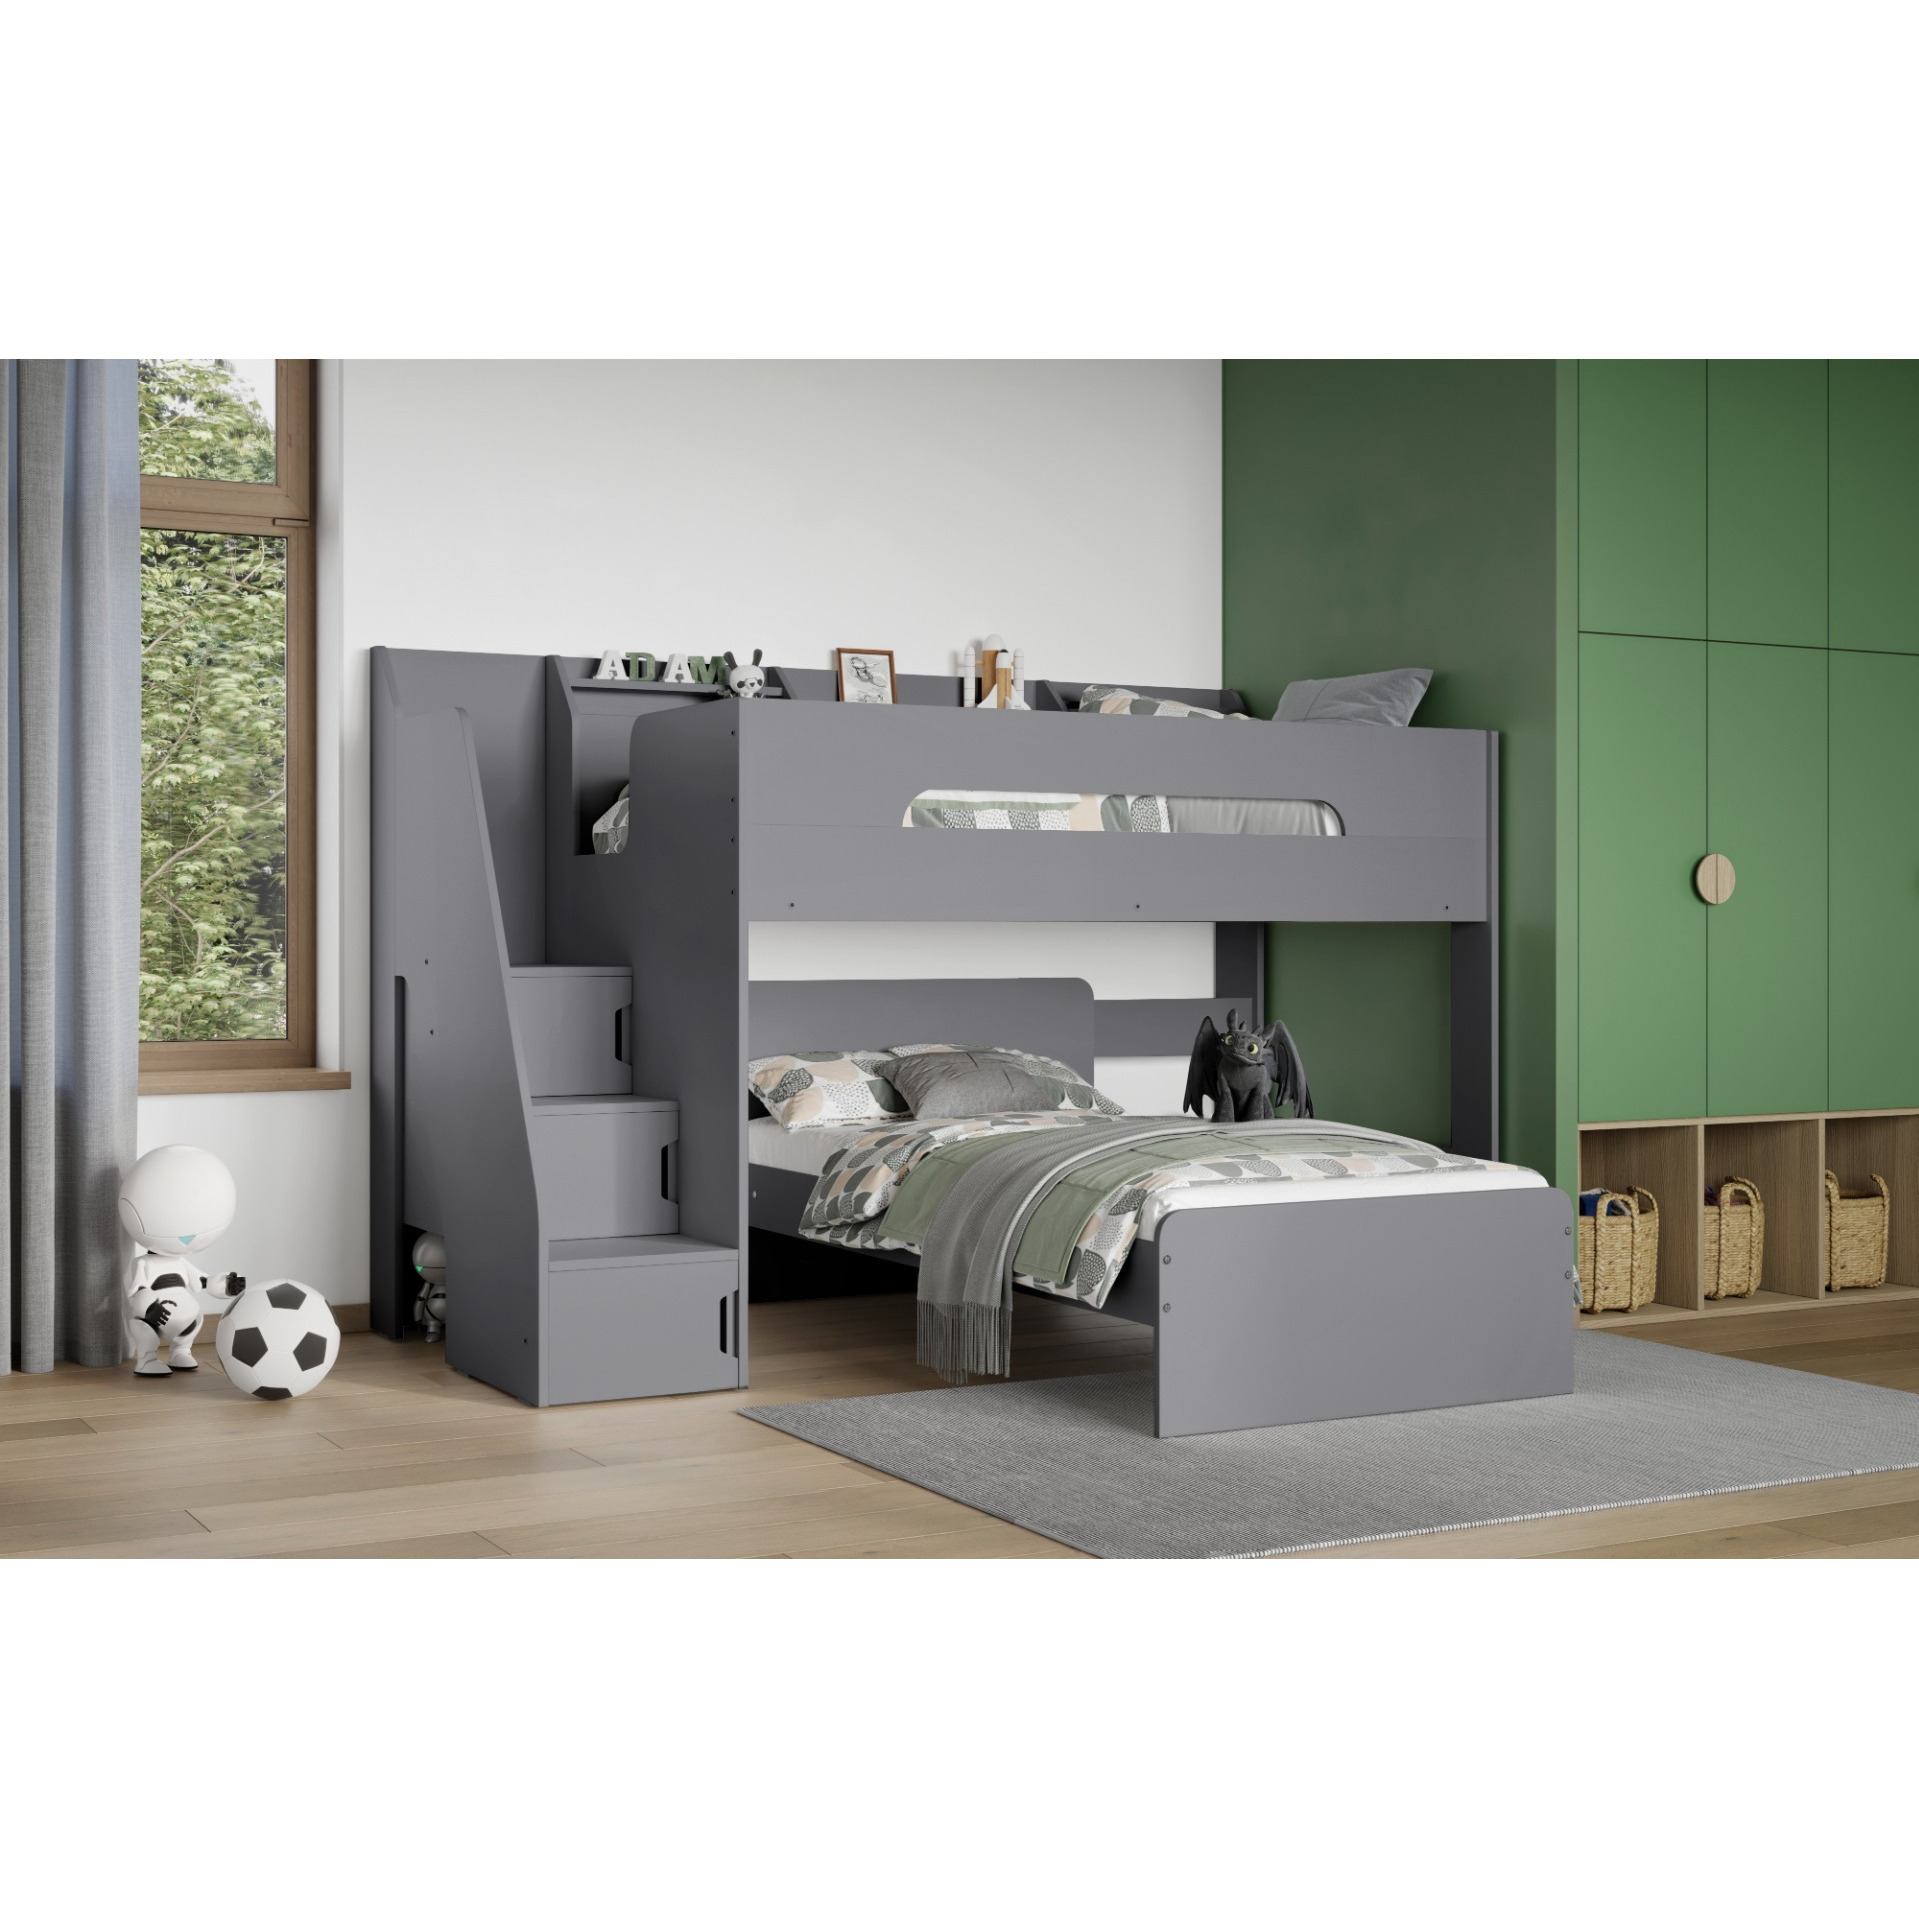 Flair Stepaside Staircase L Shaped Bunk Bed with Storage in Grey - image 1